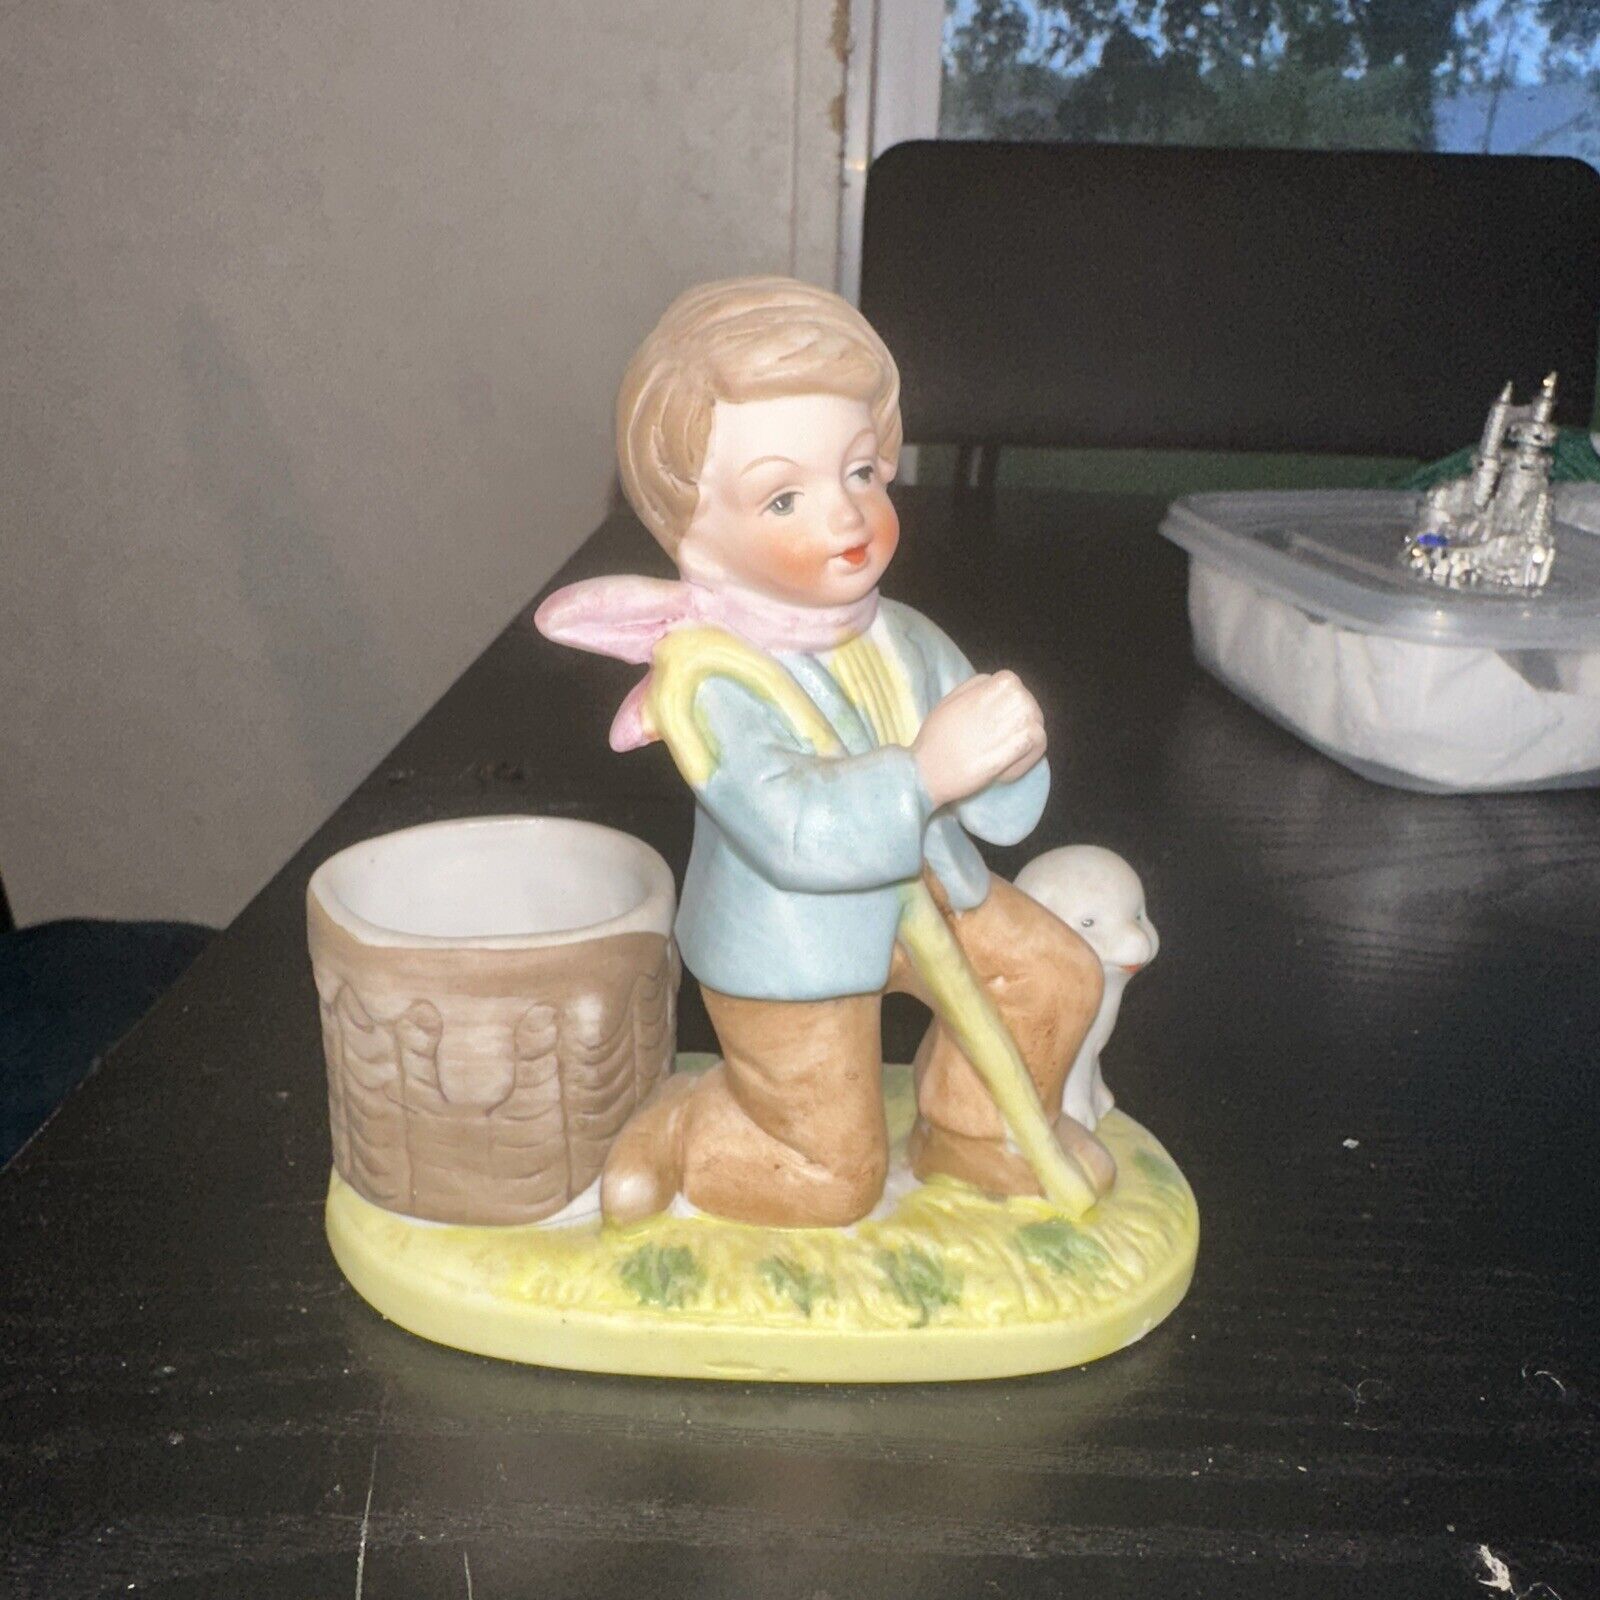 Praying Shepherd Boy With Lamb Small Planter Votive Candle Figurine Succulents